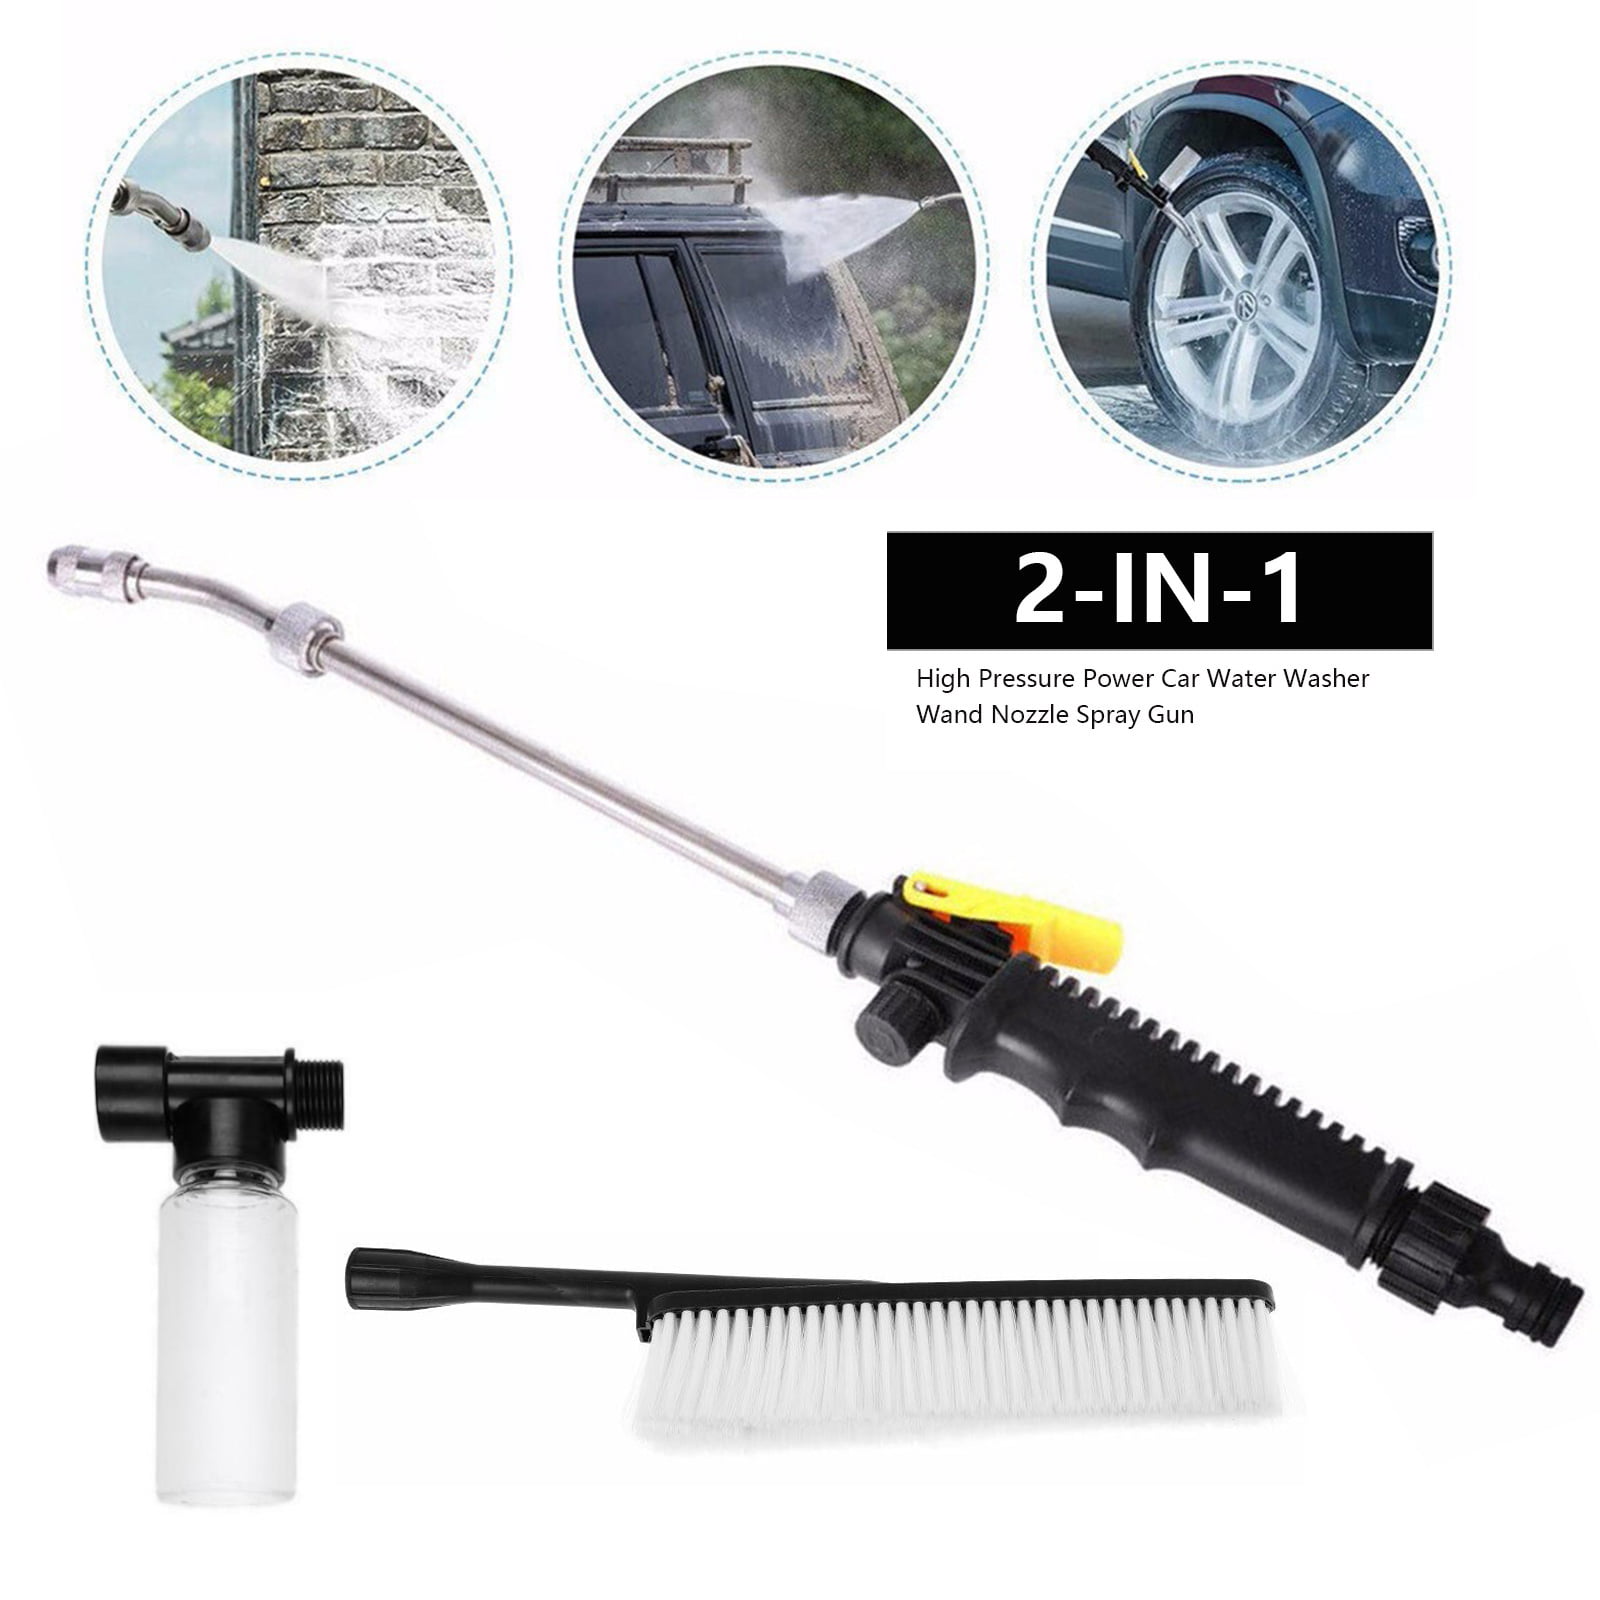 2IN1 High Pressure Power Car Water Washer Wand Detachable Nozzle Spray Gun New 